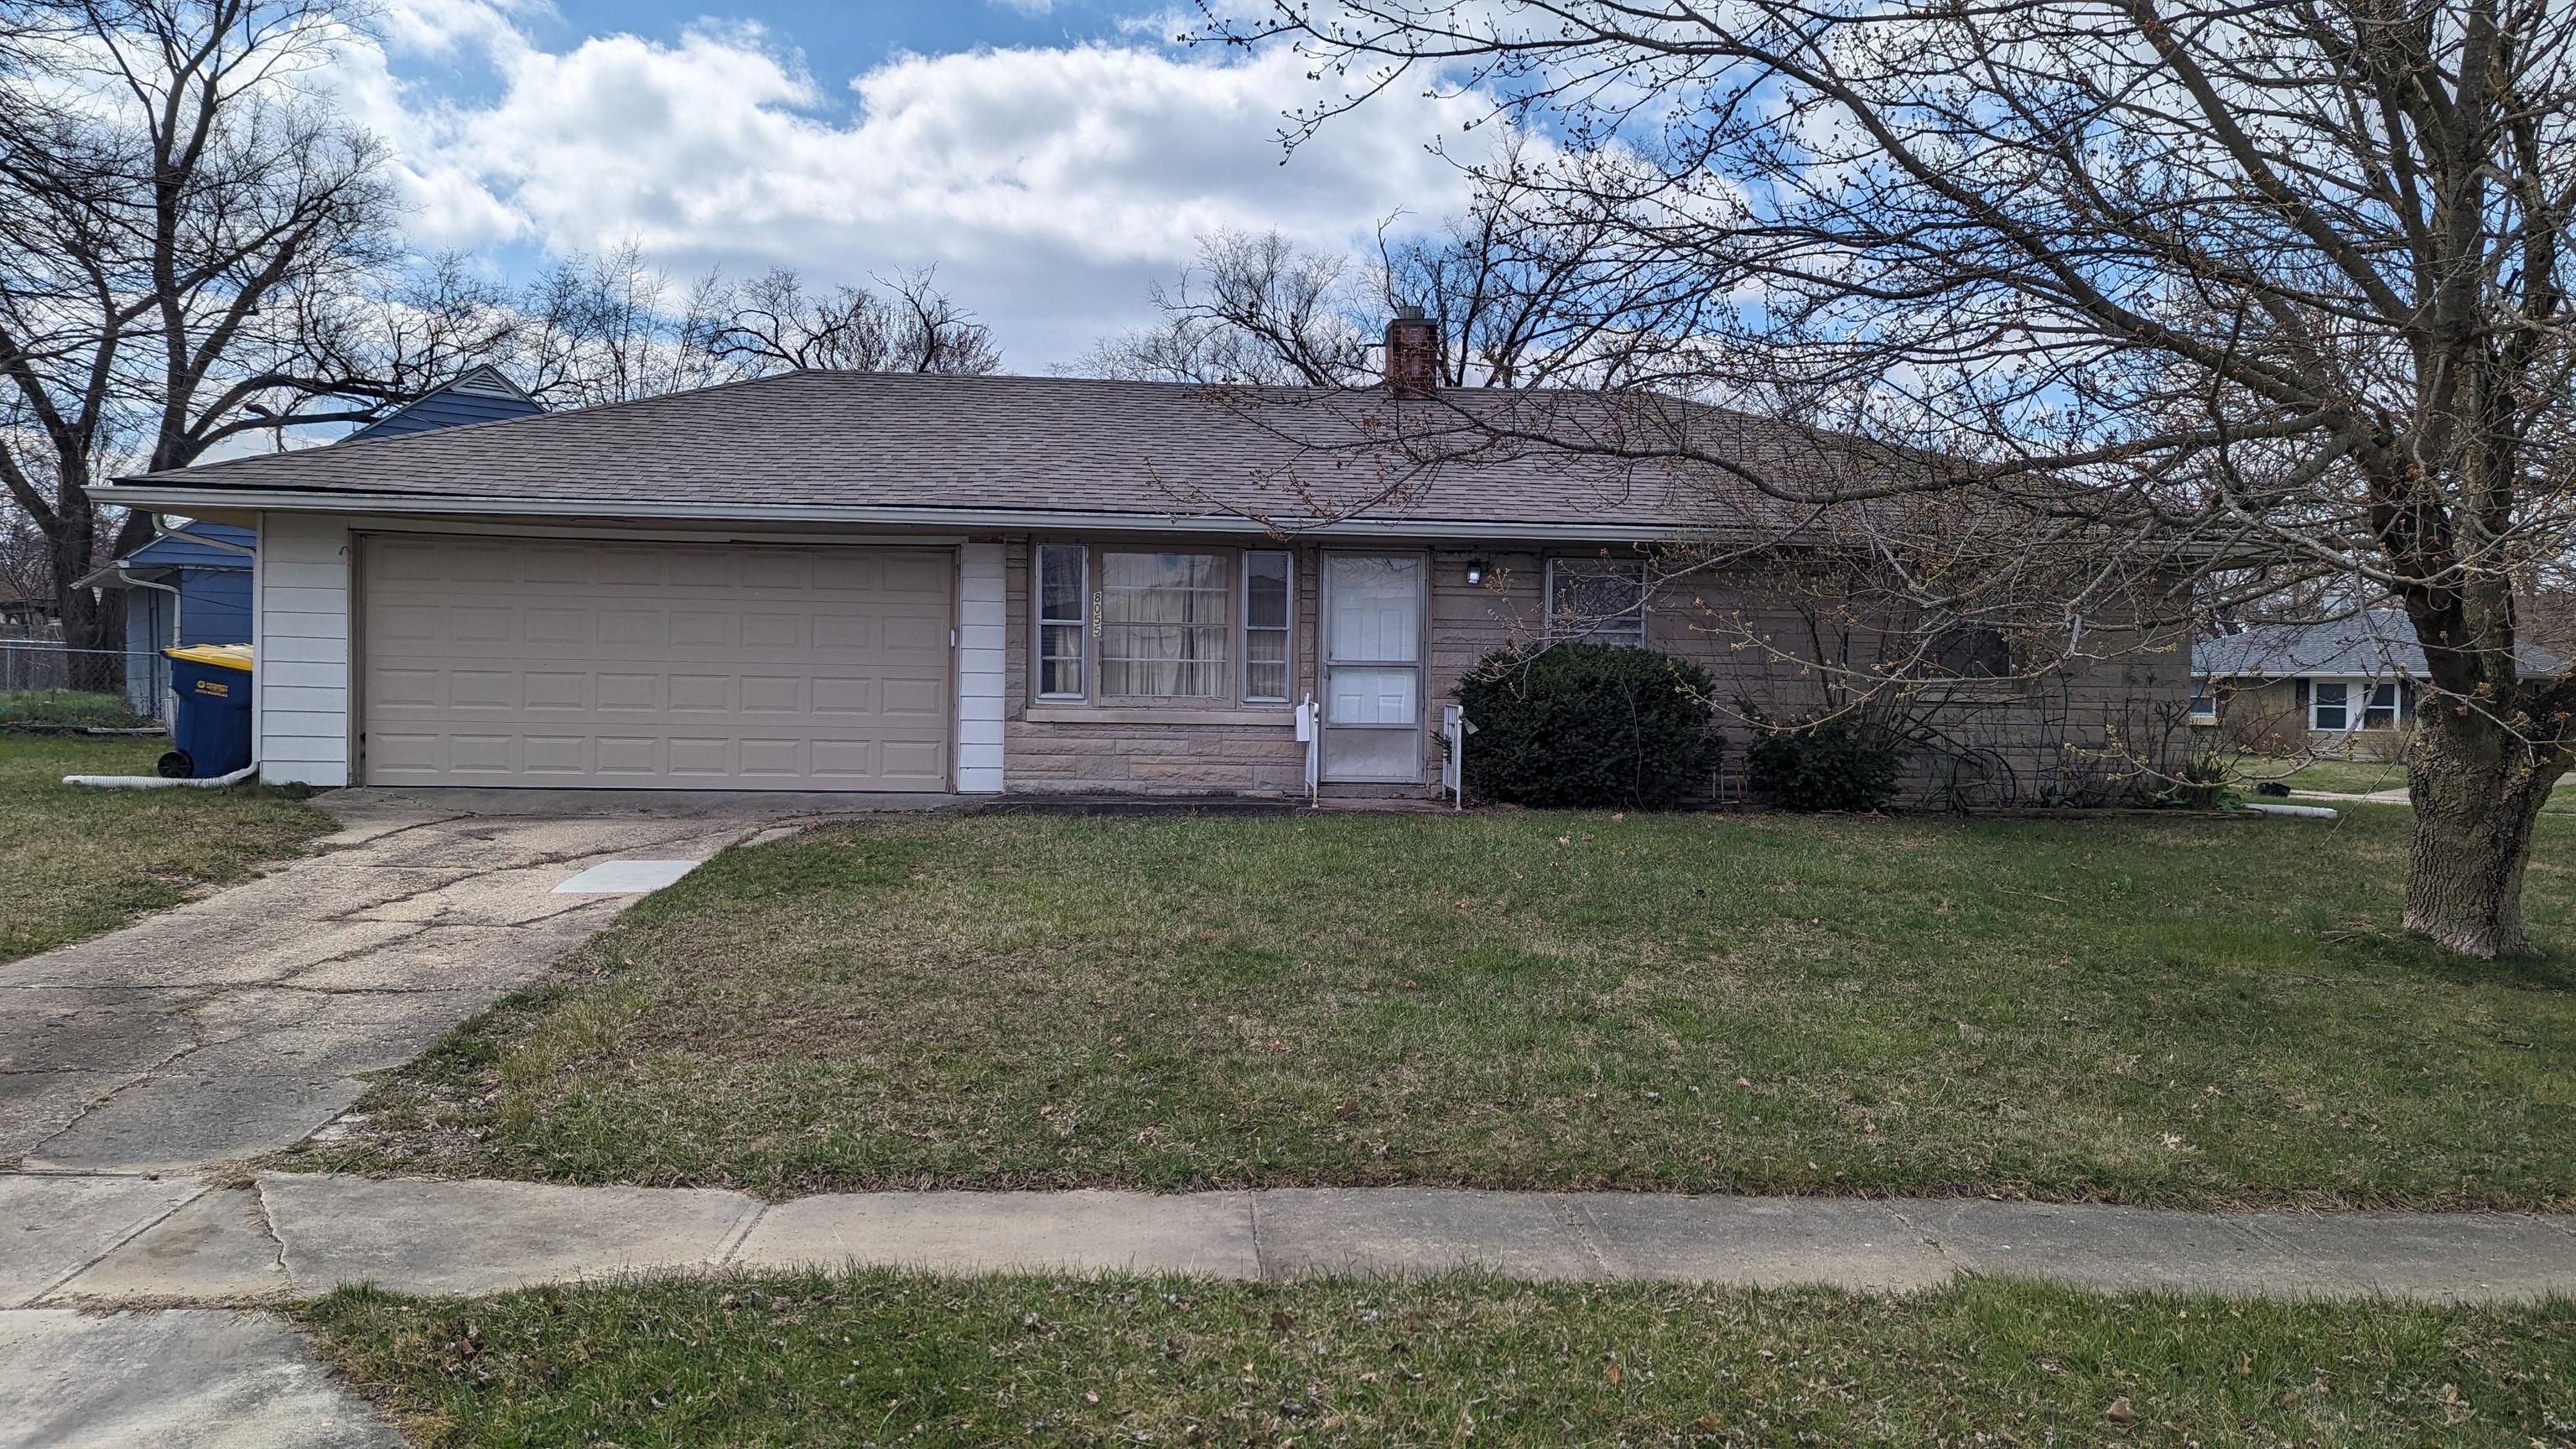 Photo one of 8055 E 50Th St Indianapolis IN 46226 | MLS 21974218